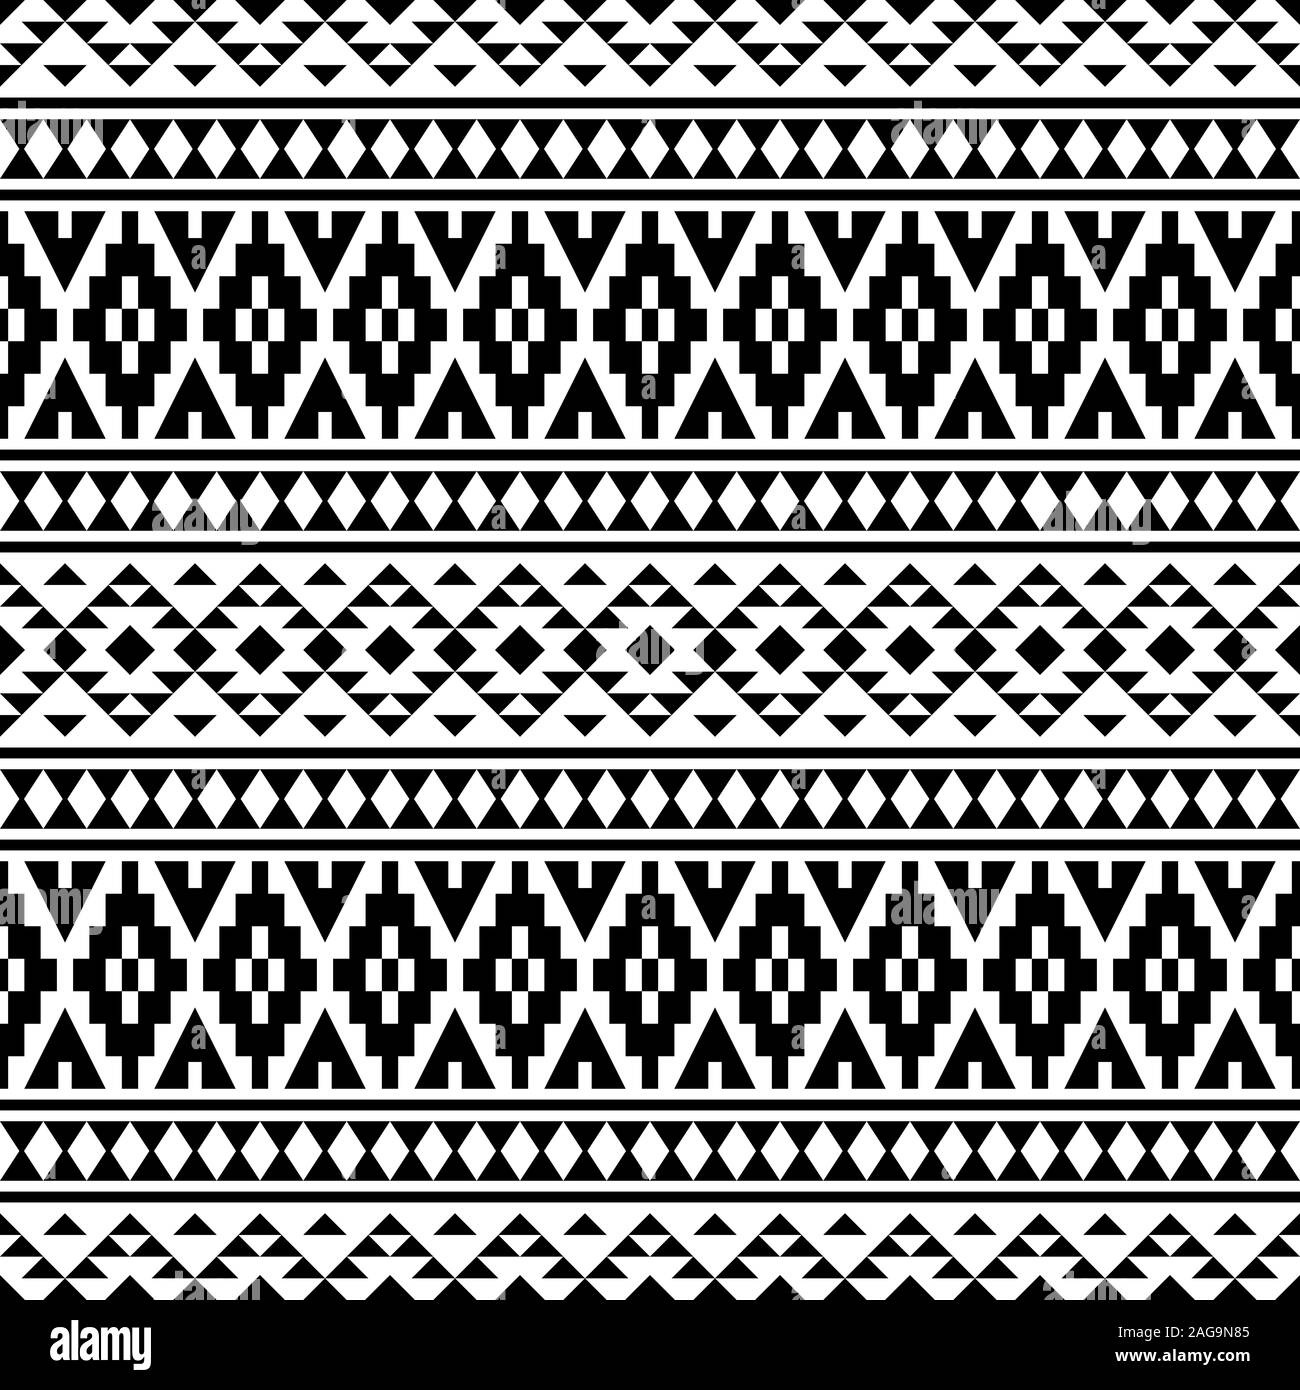 Seamless Ethnic Pattern Illustration vector with tribal design in black ...